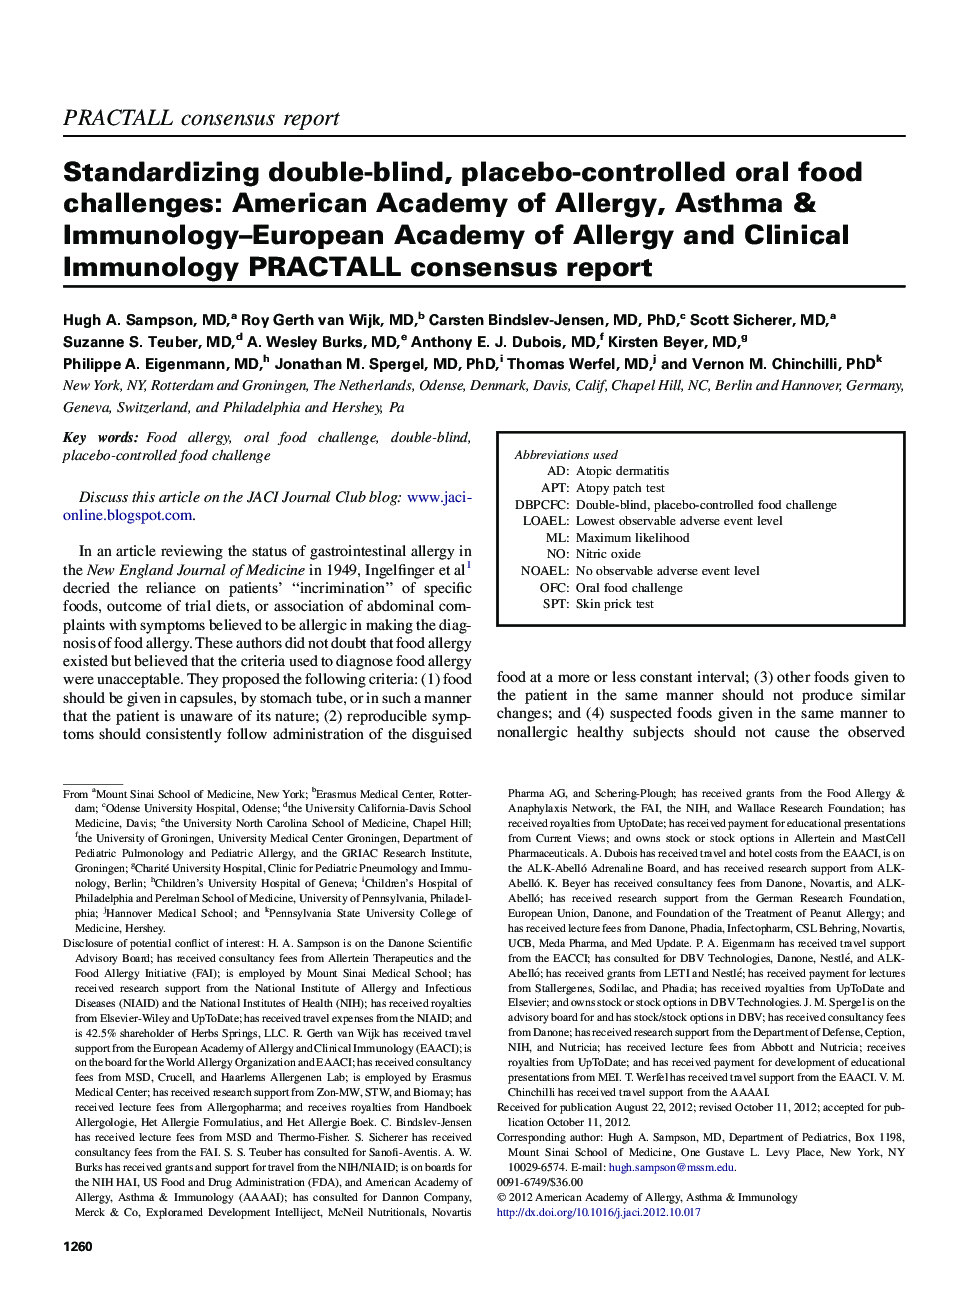 Standardizing double-blind, placebo-controlled oral food challenges: American Academy of Allergy, Asthma & Immunology-European Academy of Allergy and Clinical Immunology PRACTALL consensus report